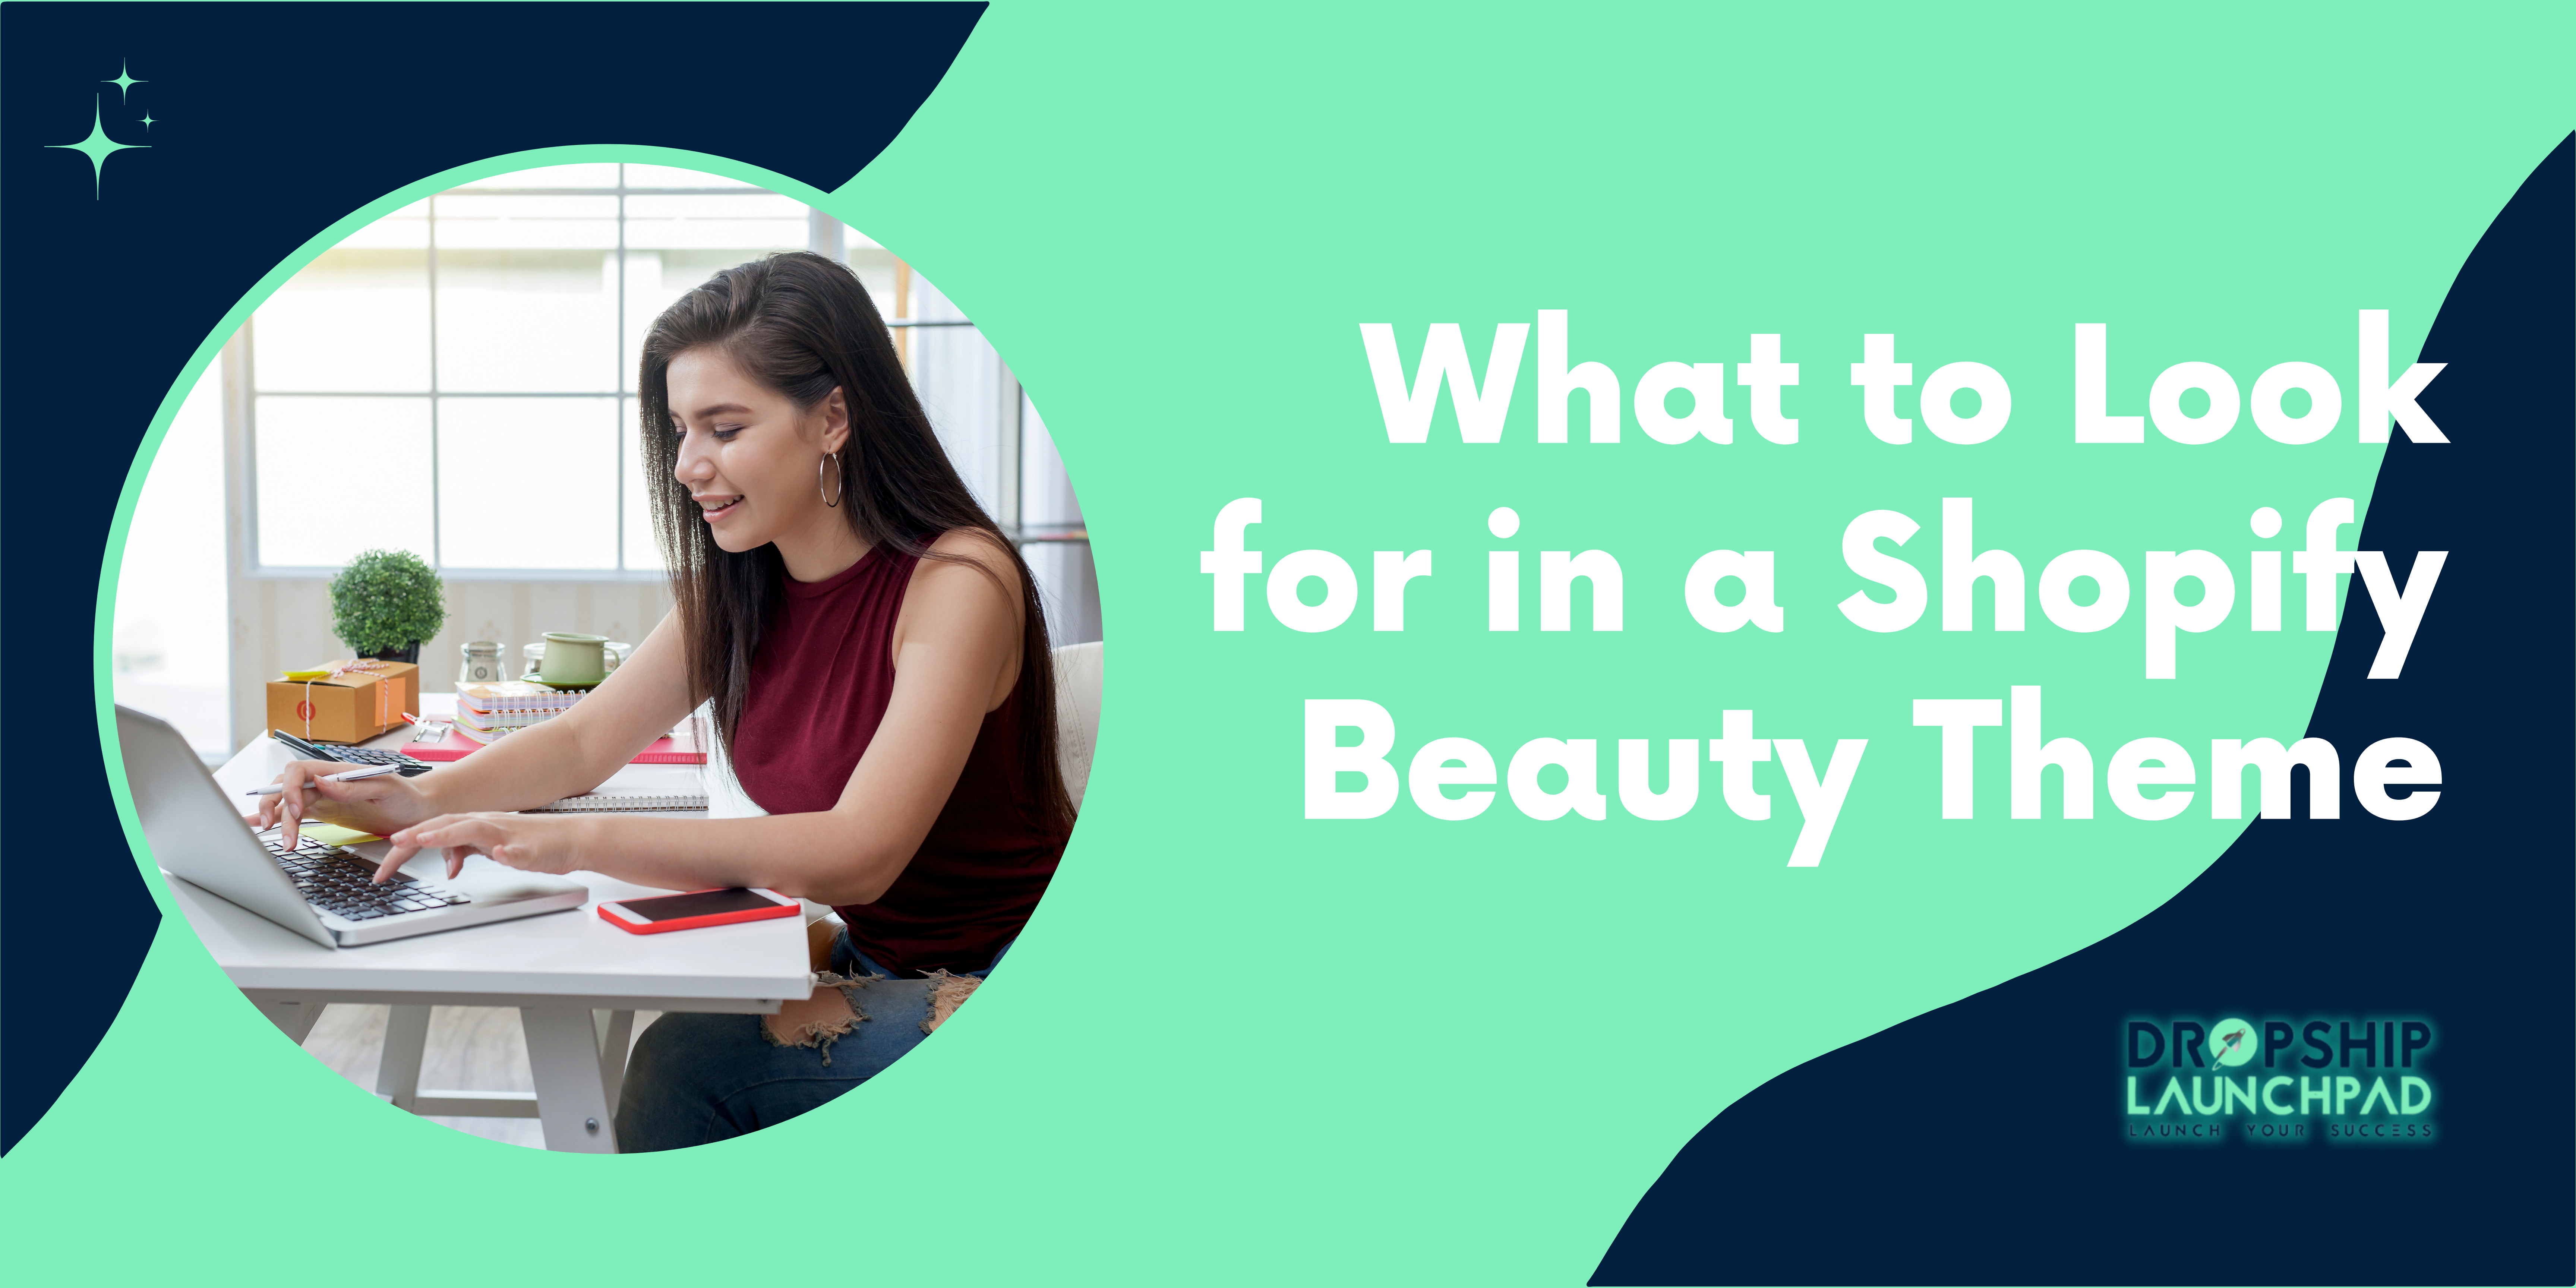 What to Look for in a Shopify Beauty Theme